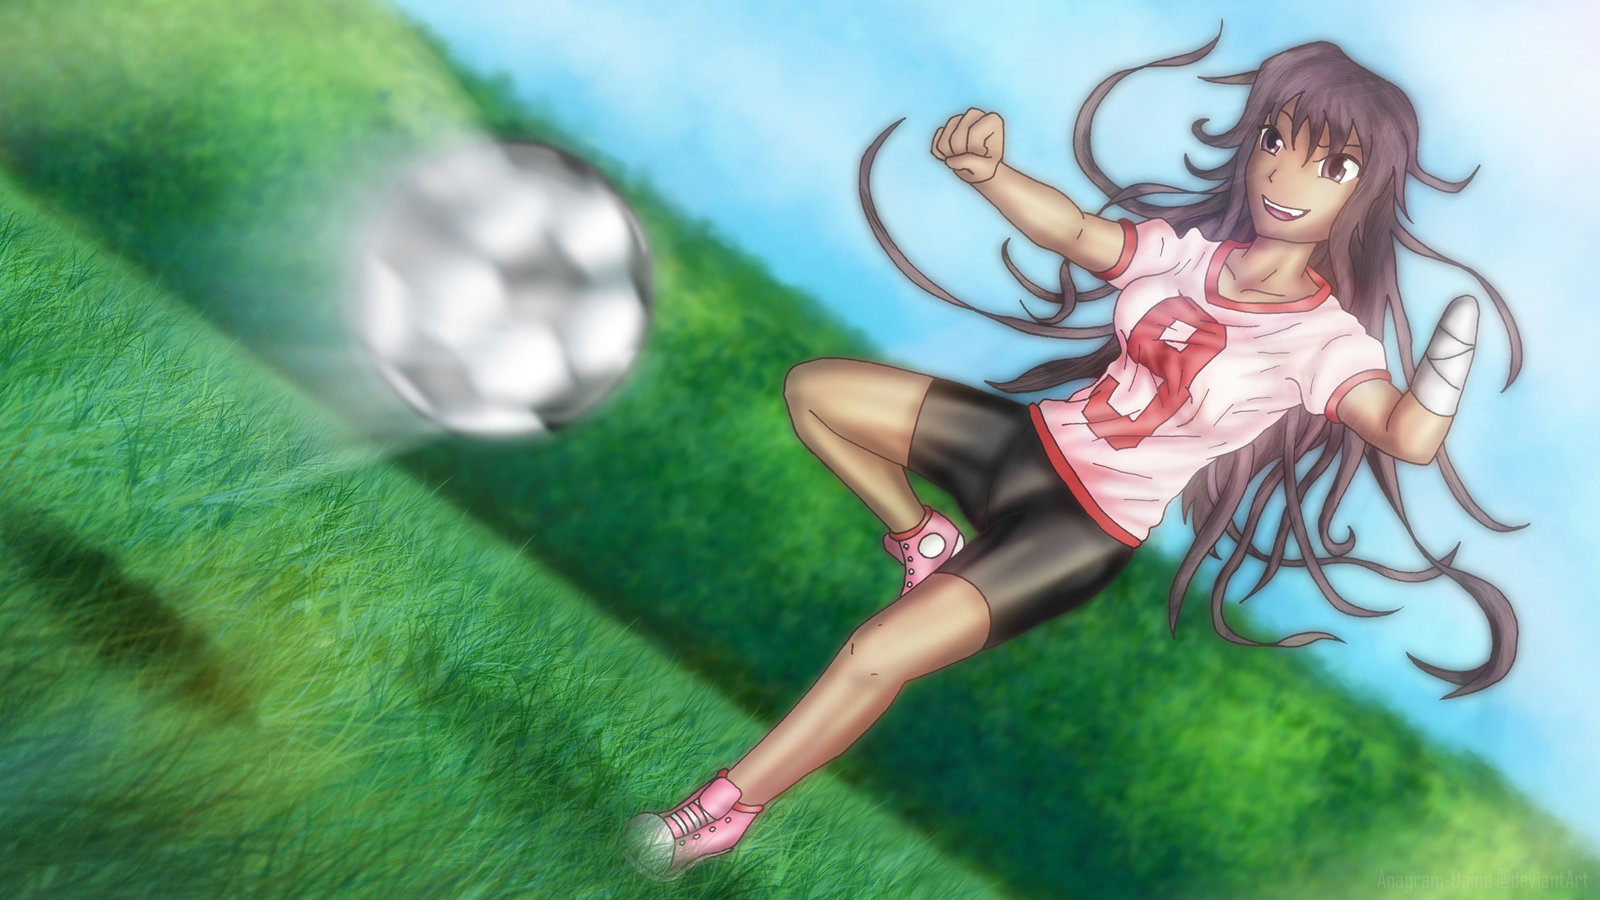 miki_playing_soccer_by_anagram_daine-d83m6dw.jpg